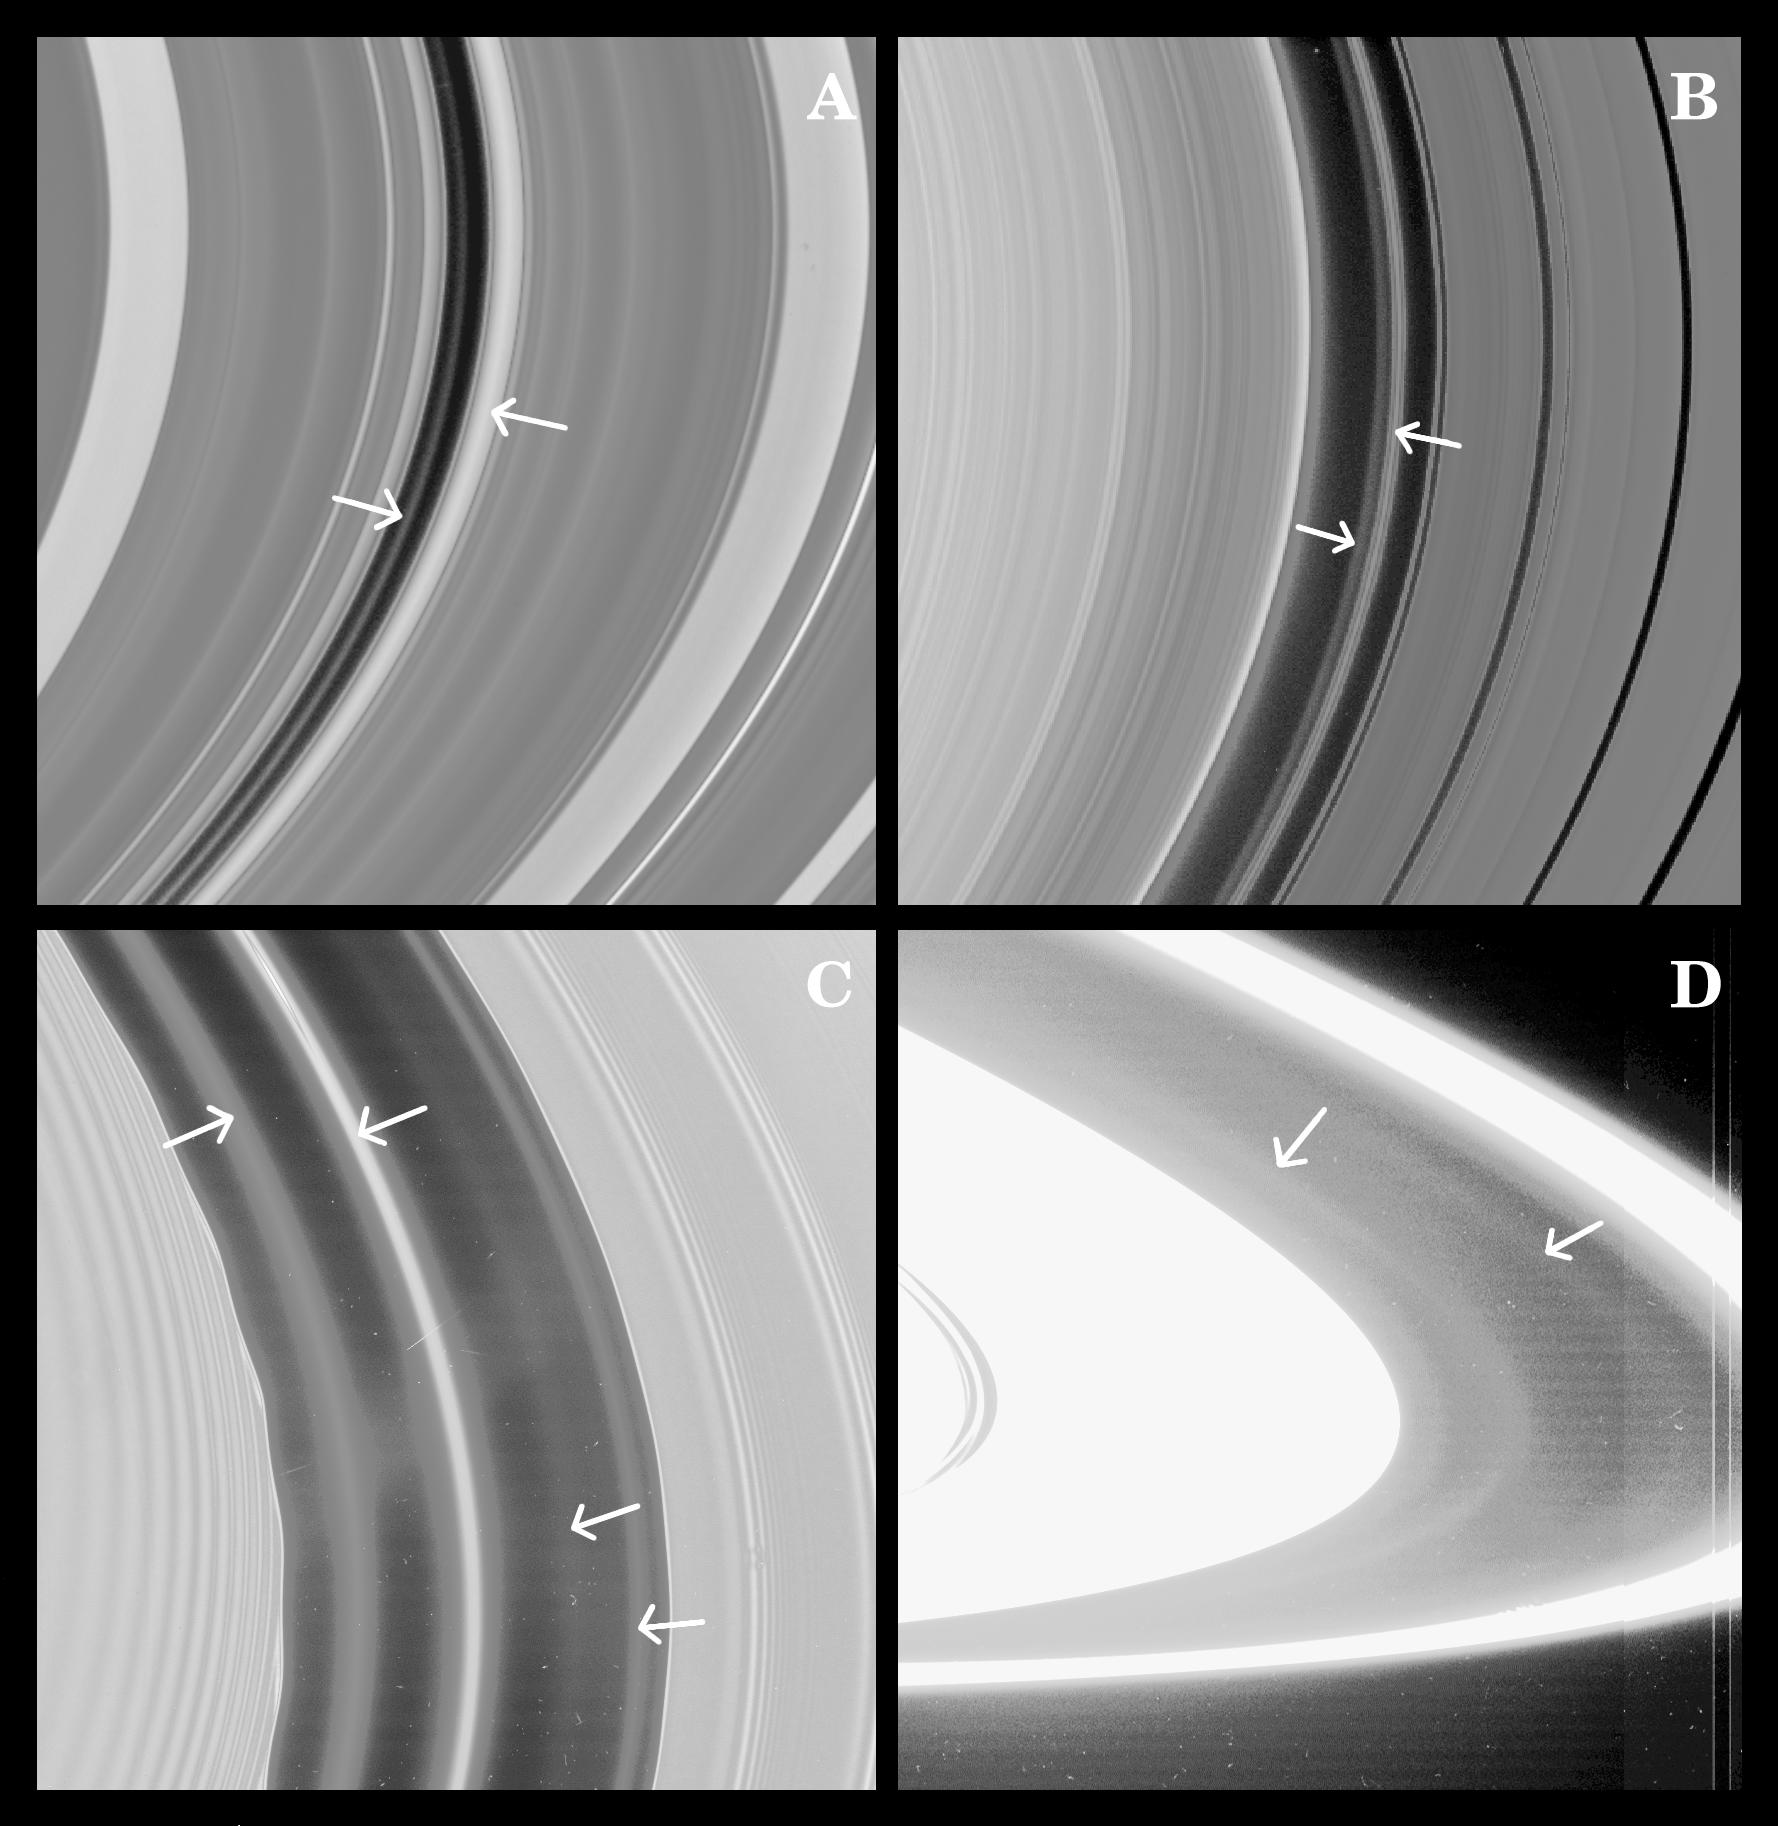 Four views of Saturn's rings labeled A through D, including arrows described in the caption